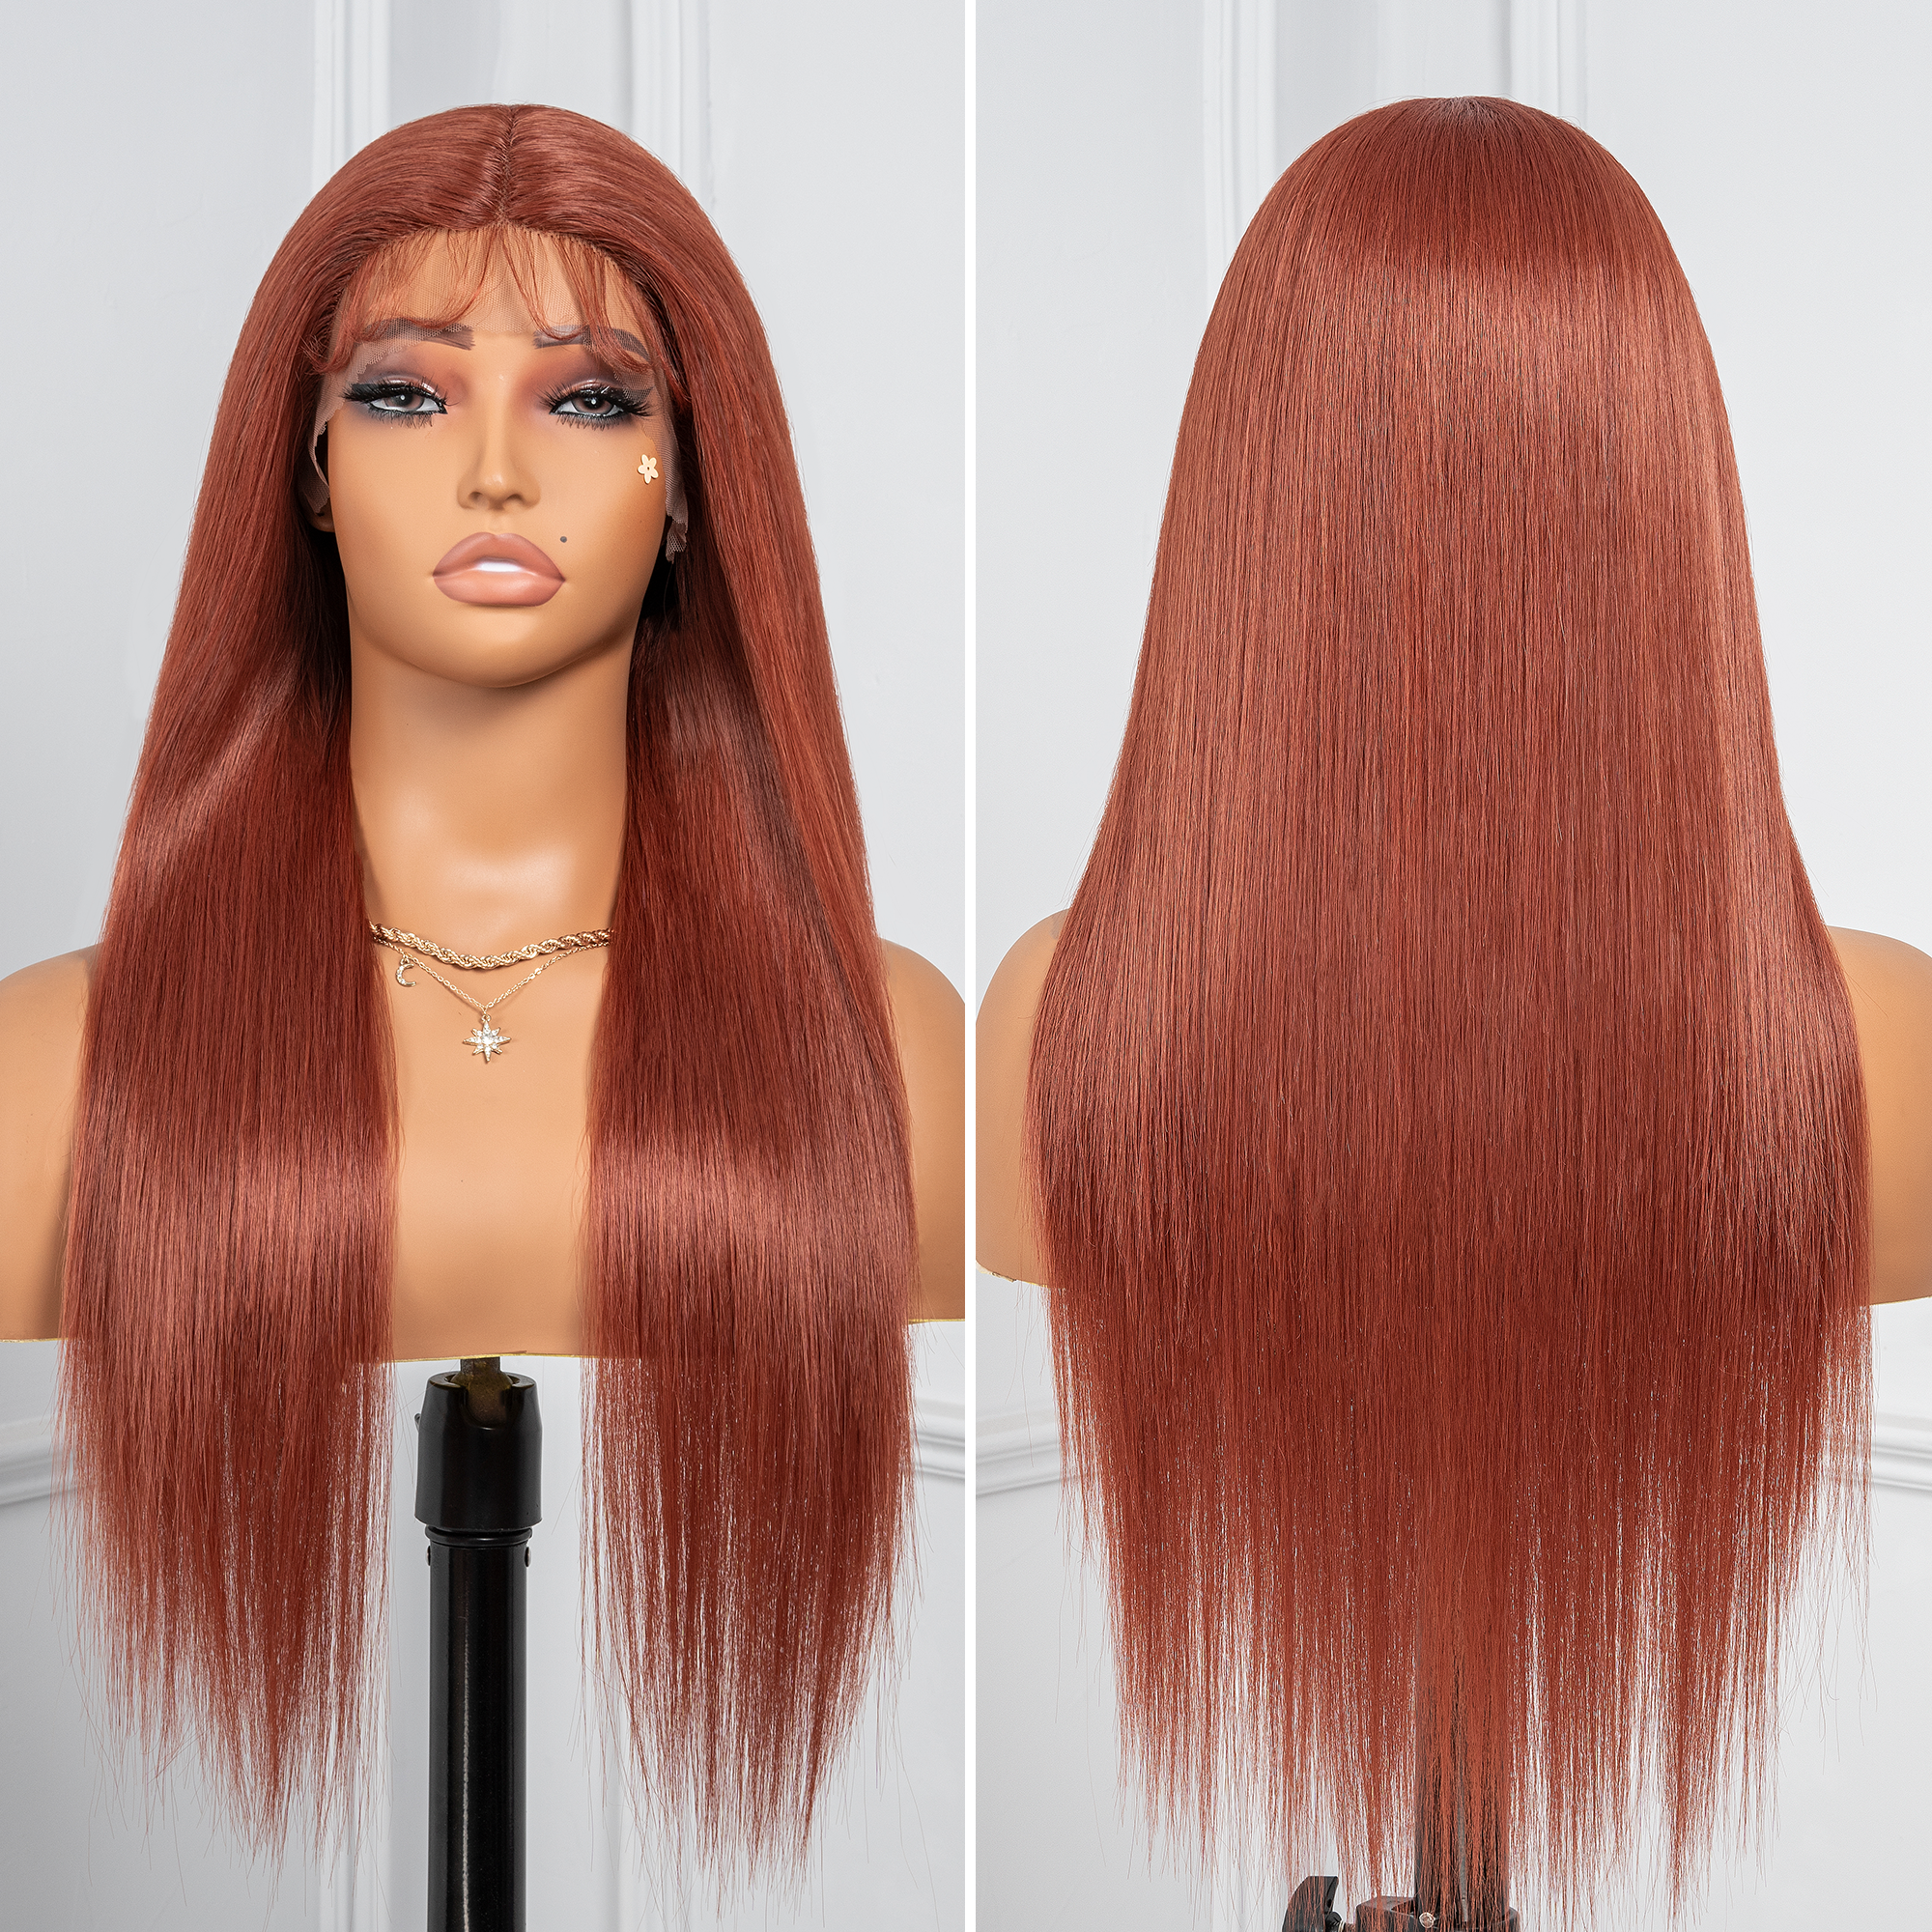 𝗣𝗶𝘀𝗰𝗲𝘀 | Toyotress Airy Yaki Straight T-middle Part Lace Front Wigs with Baby Hair | 20-32 Inch Long Soft Human Hair Rival Brown With Piano Highlights Wig(1472)